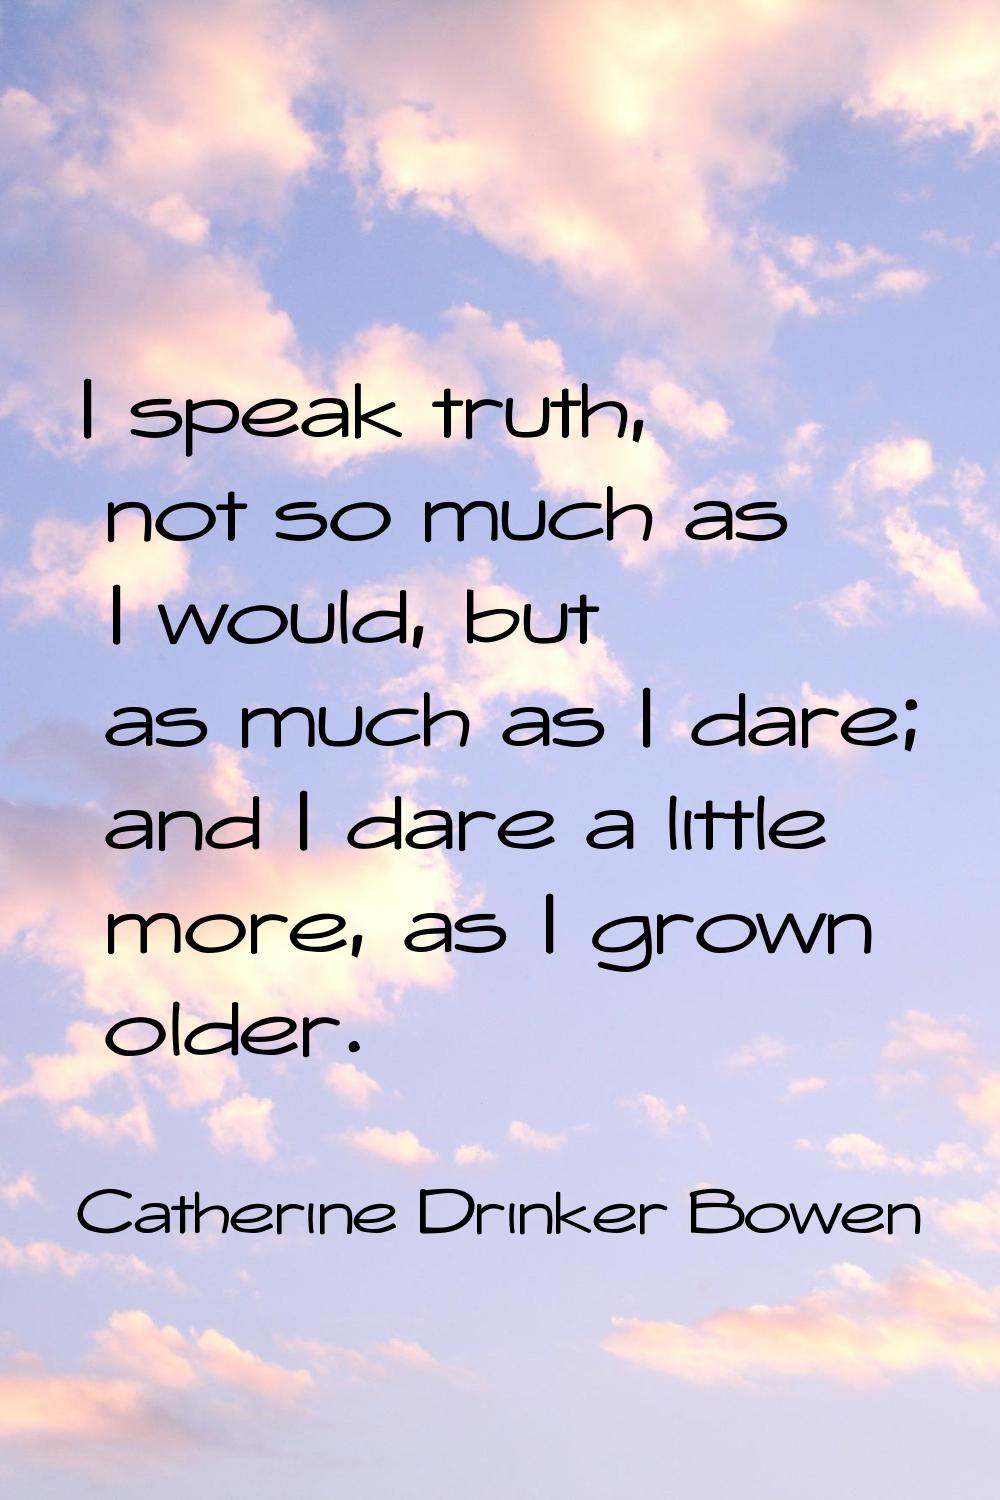 I speak truth, not so much as I would, but as much as I dare; and I dare a little more, as I grown 